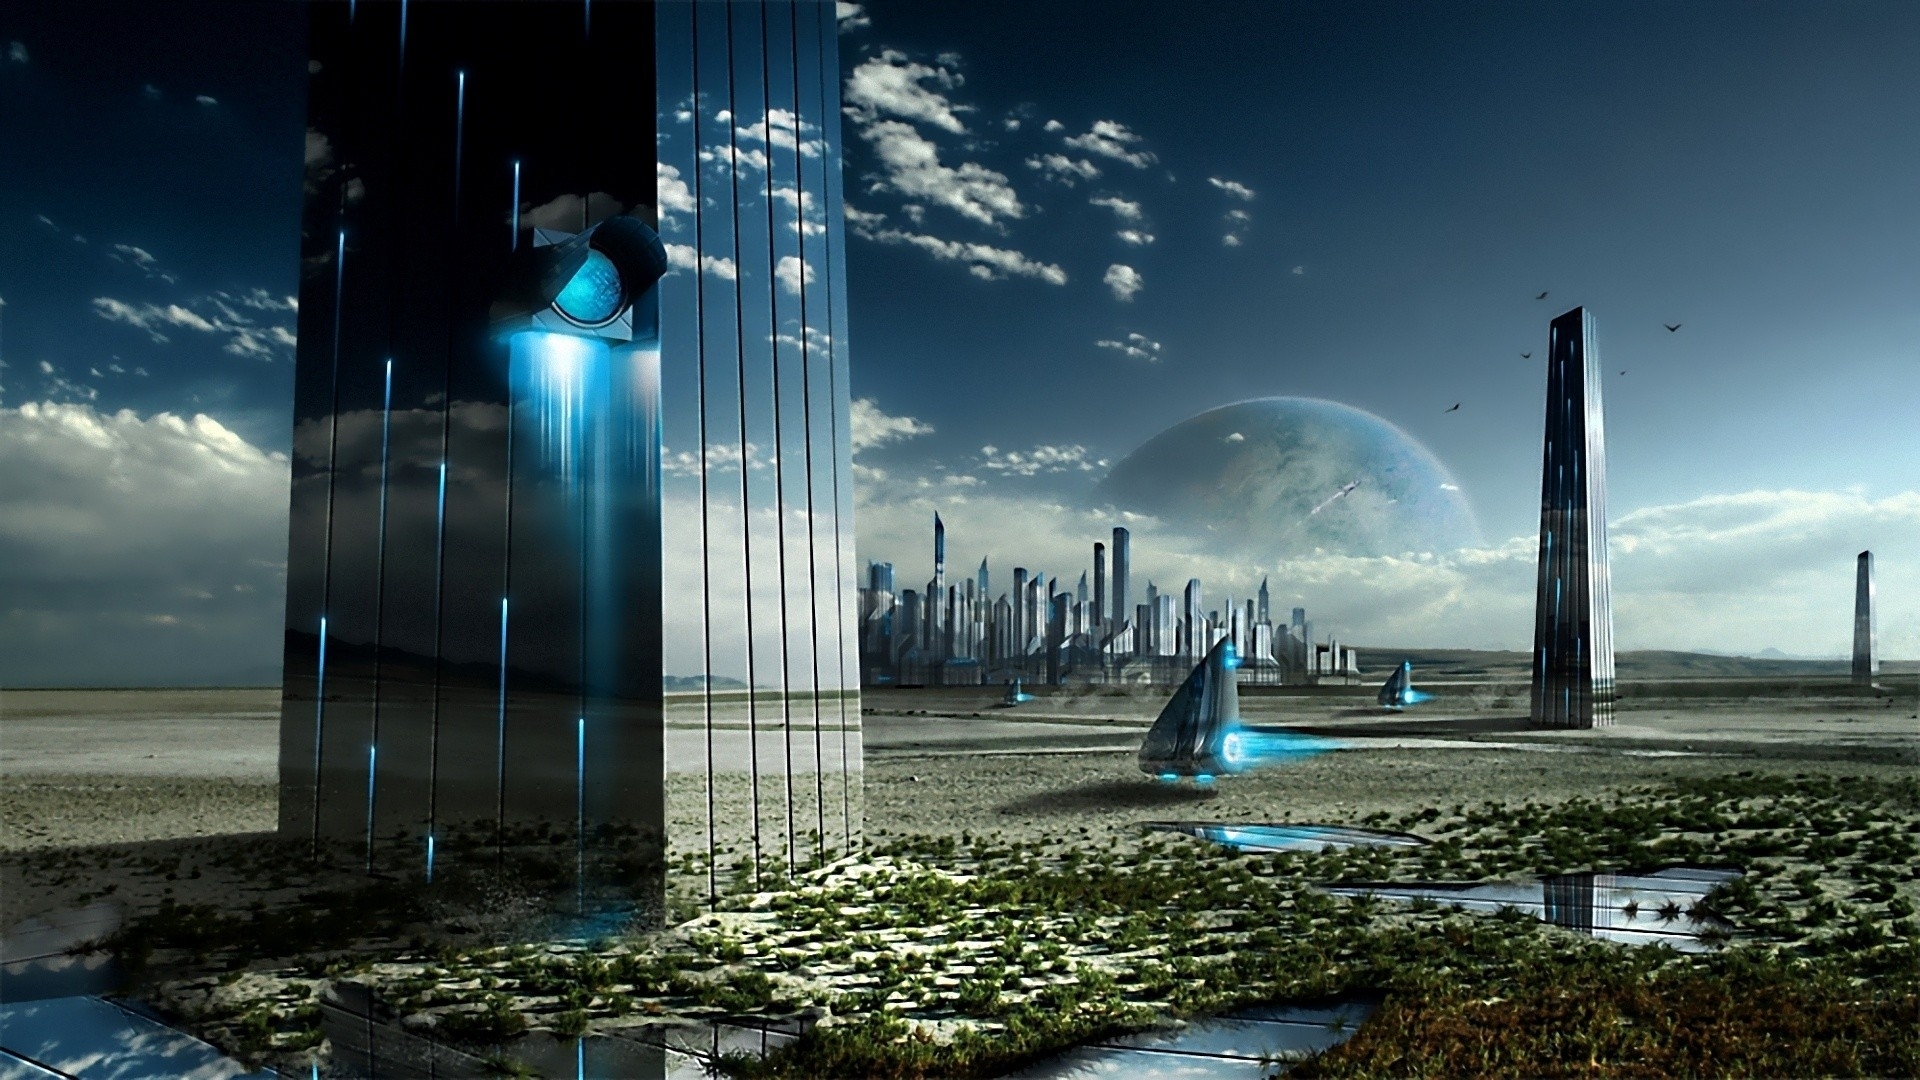 10 Best Science Fiction Wallpaper Hd FULL HD 1080p For PC ...